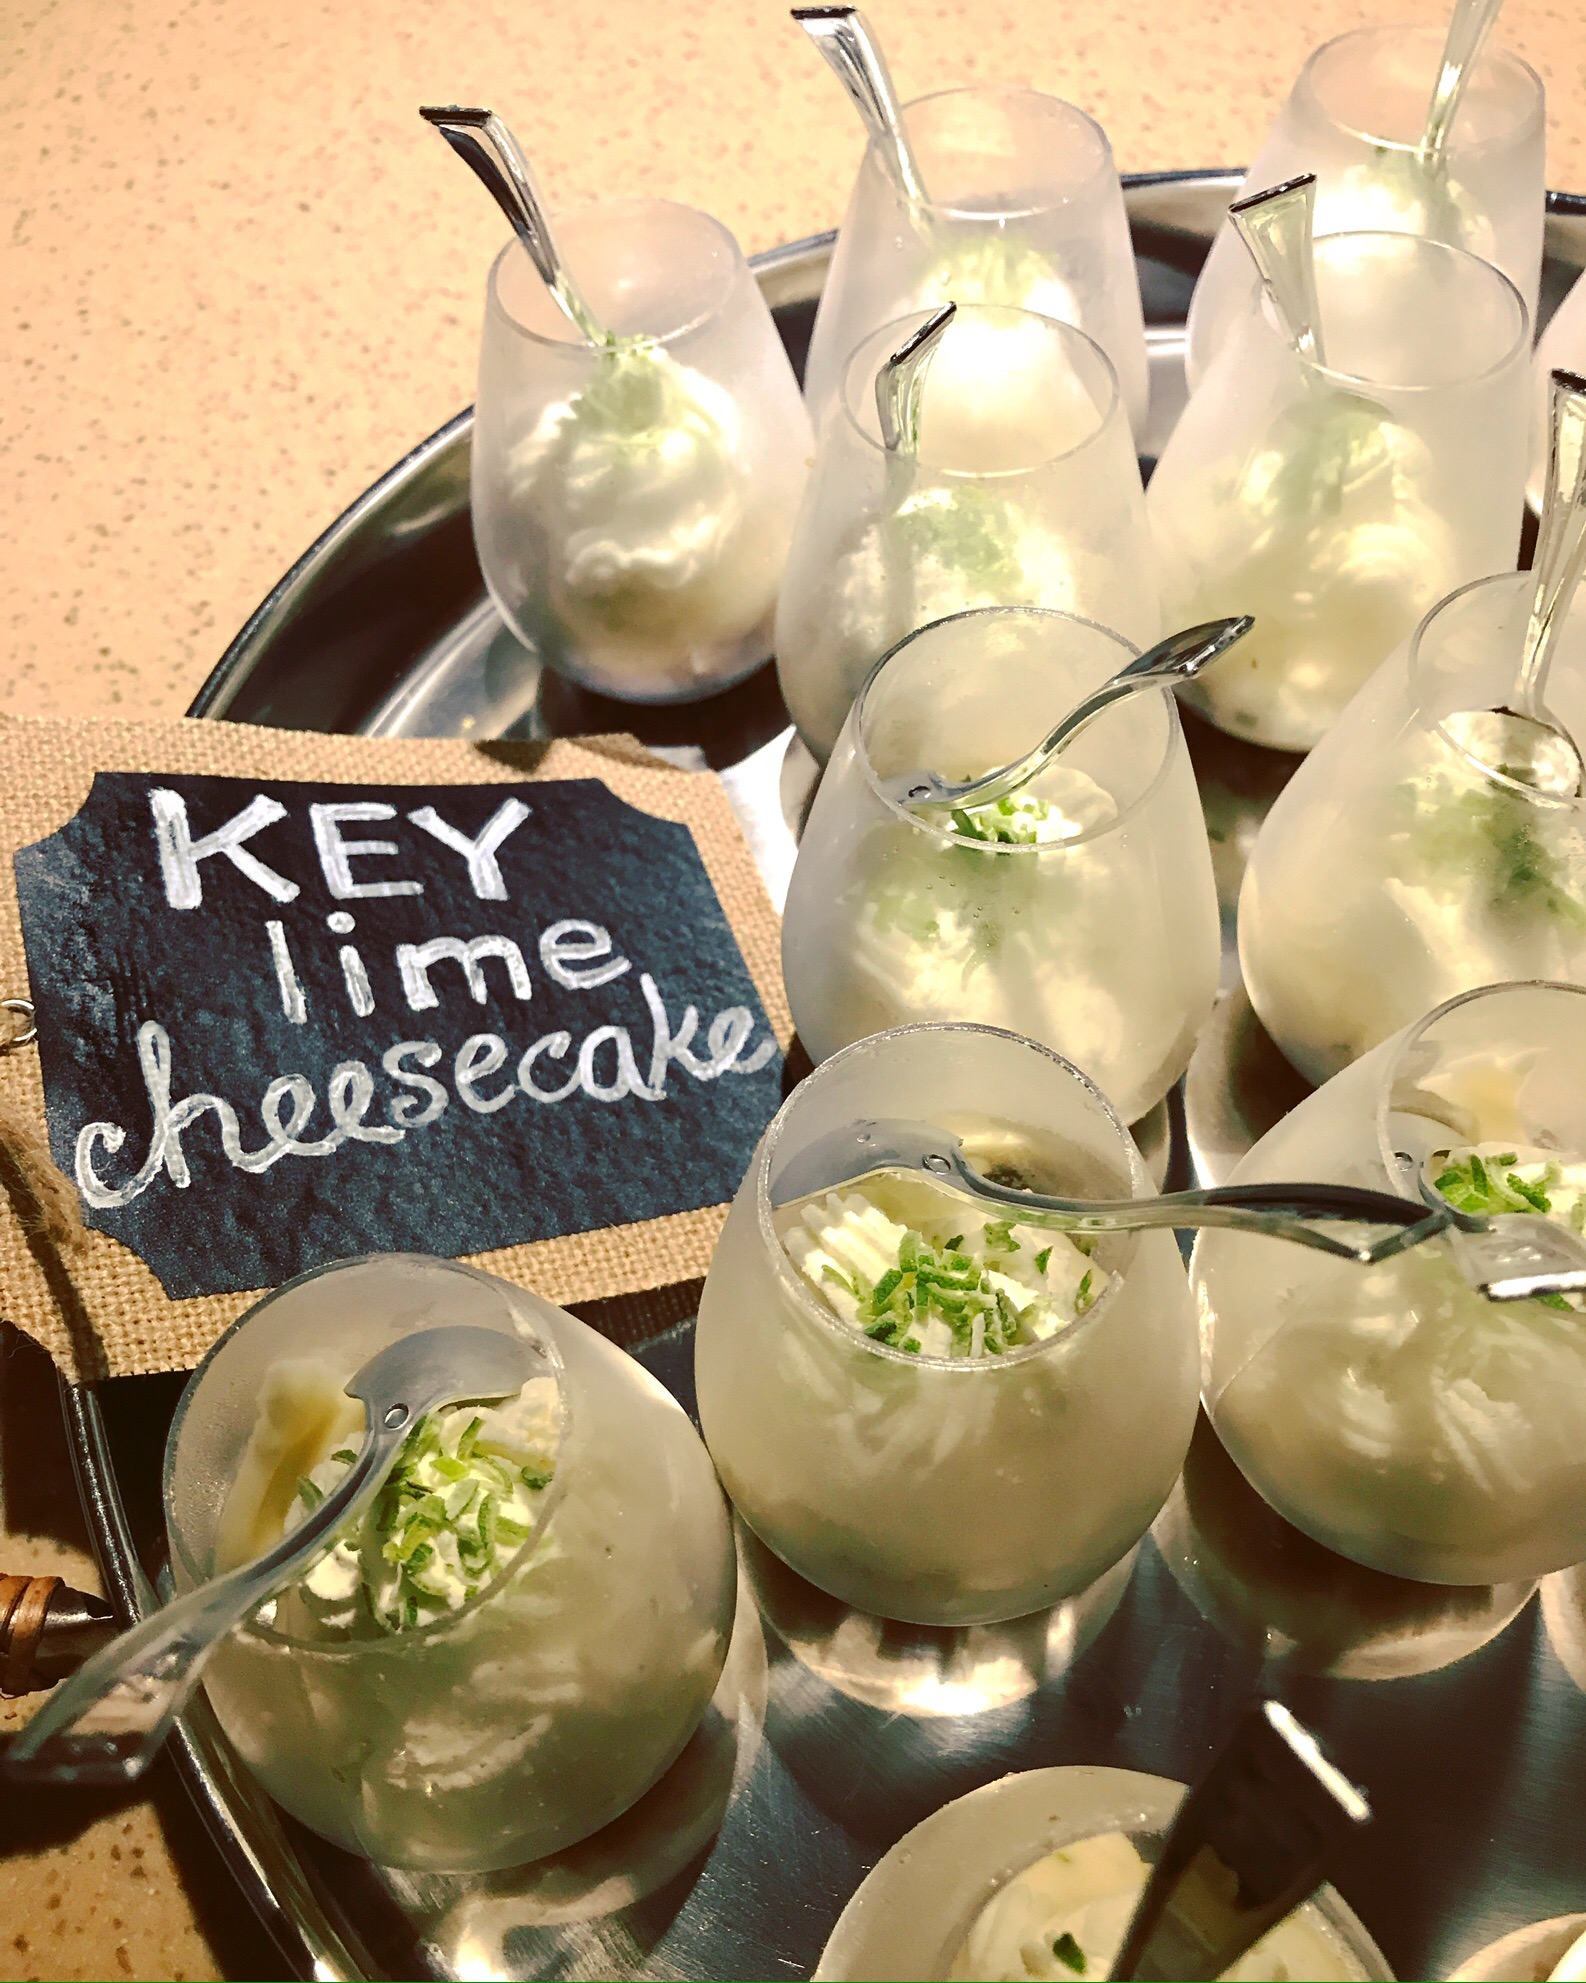 Instagram picture from Nuit Blanche of Mini Frozen Key Lime Cheesecakes